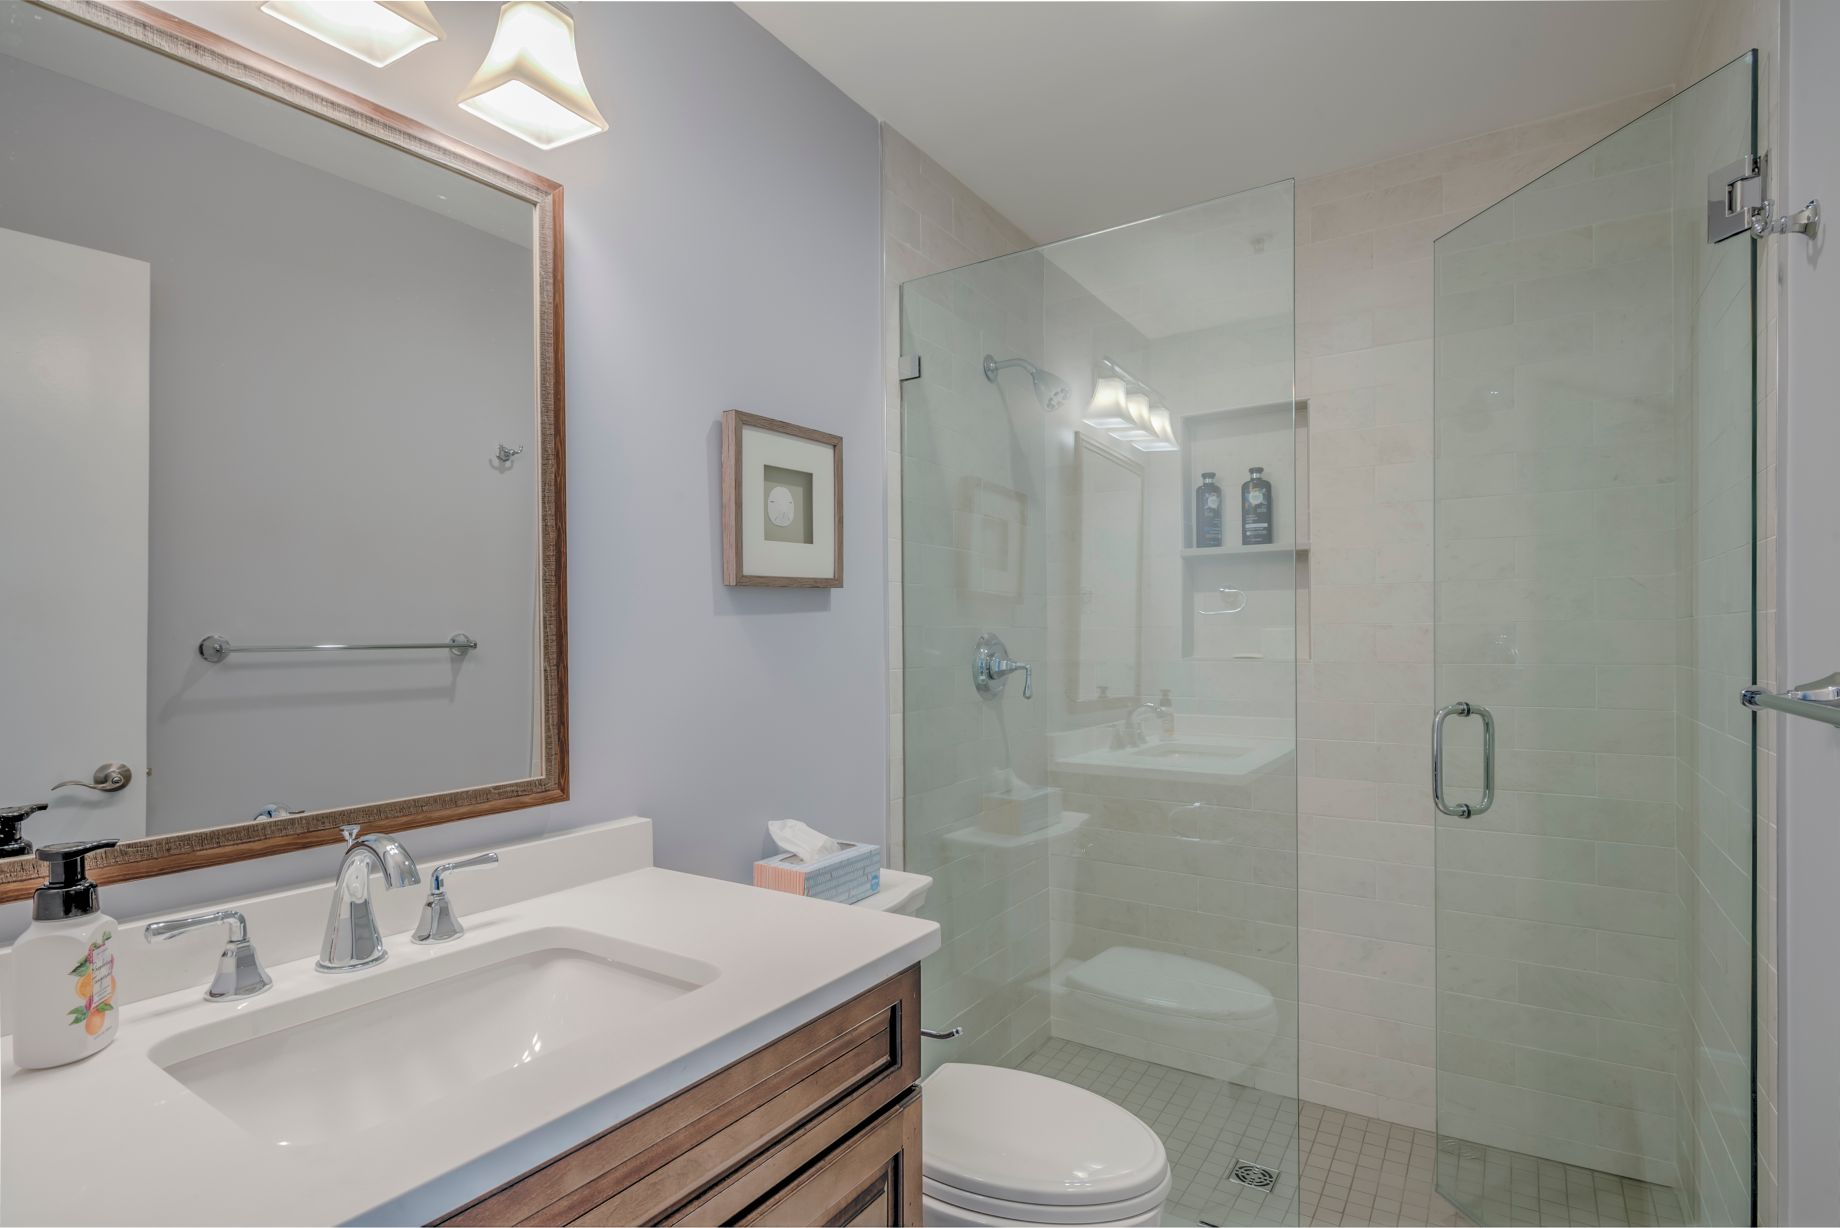 Bathroom Remodel in Kings Grant, Fenwick Island DE with Light Wood Vanity with White Top, and Large Square Mirror